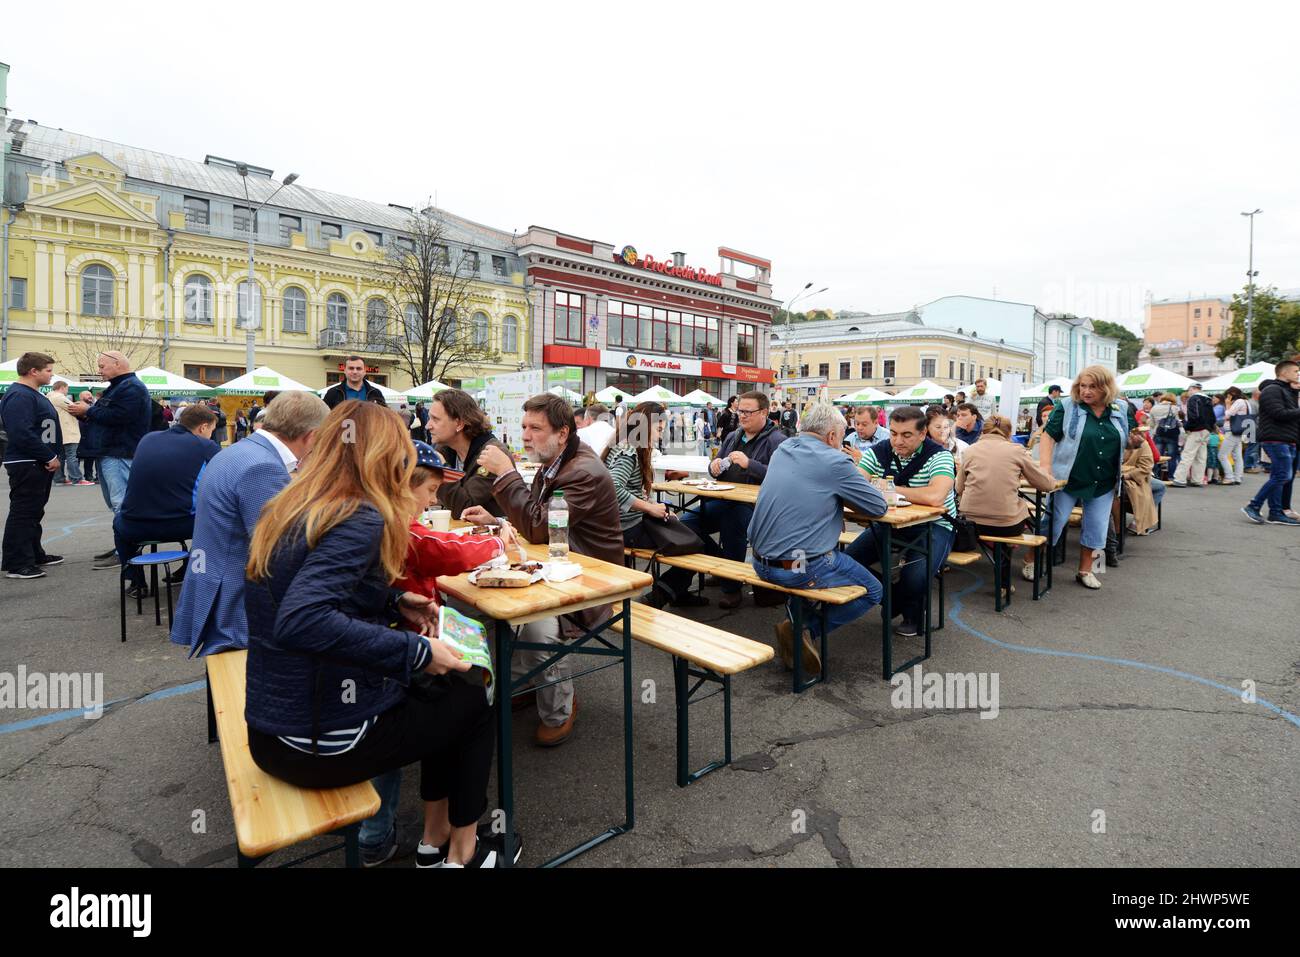 September 2017, Kyiv, Ukraine. An International food festival at the Square of Contracts attracts many locals and tourist. Stock Photo